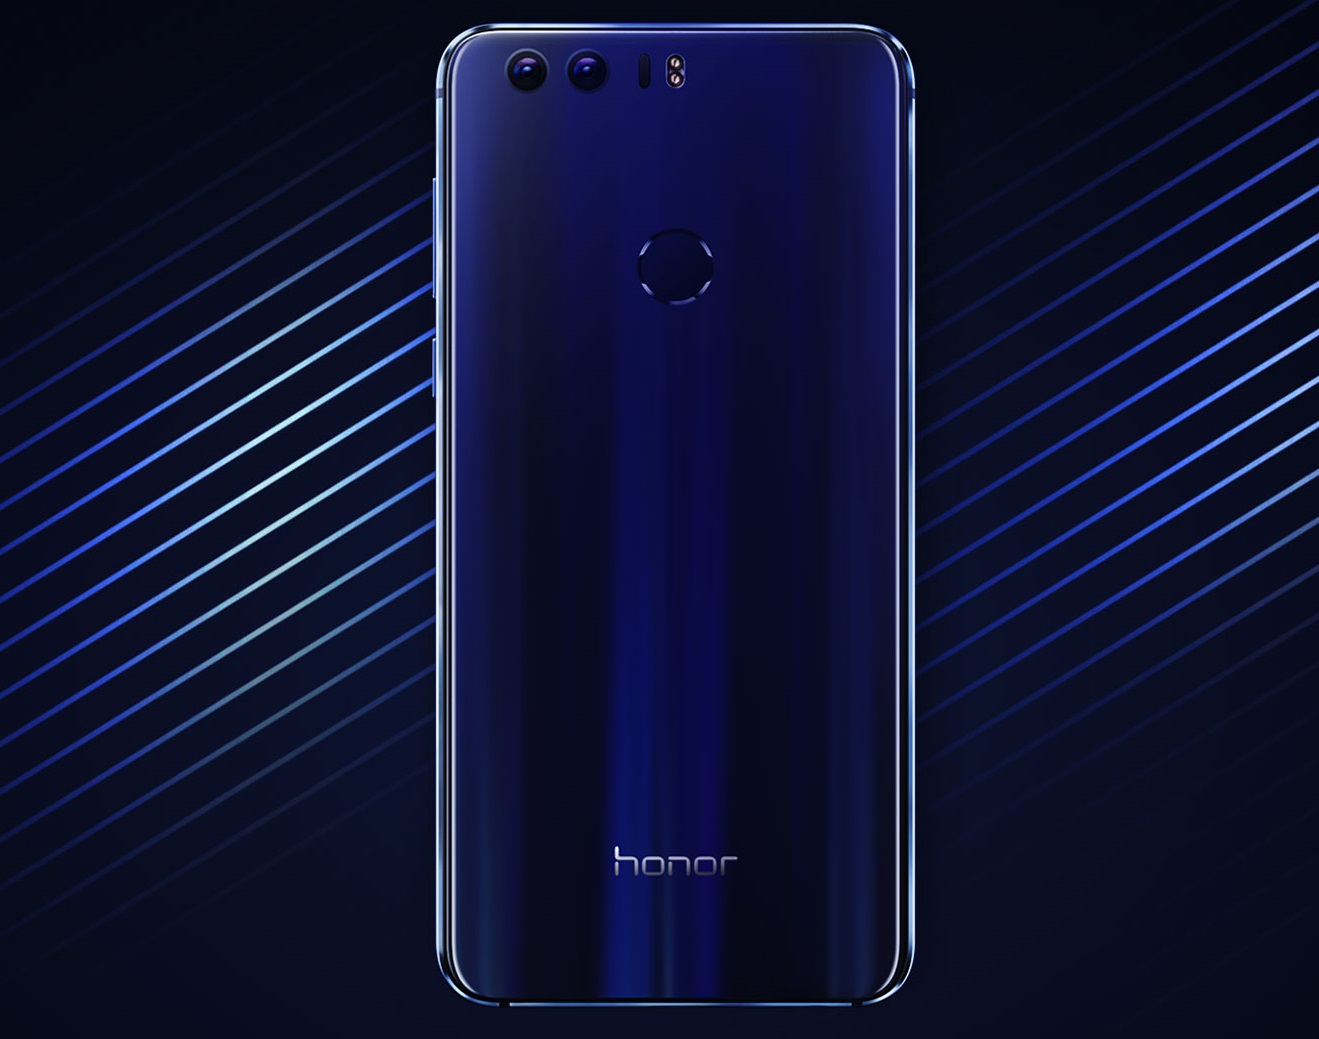 Huawei Announces Honor 8 With Dual Rear Cameras For 270 Euros Notebookcheck Net News